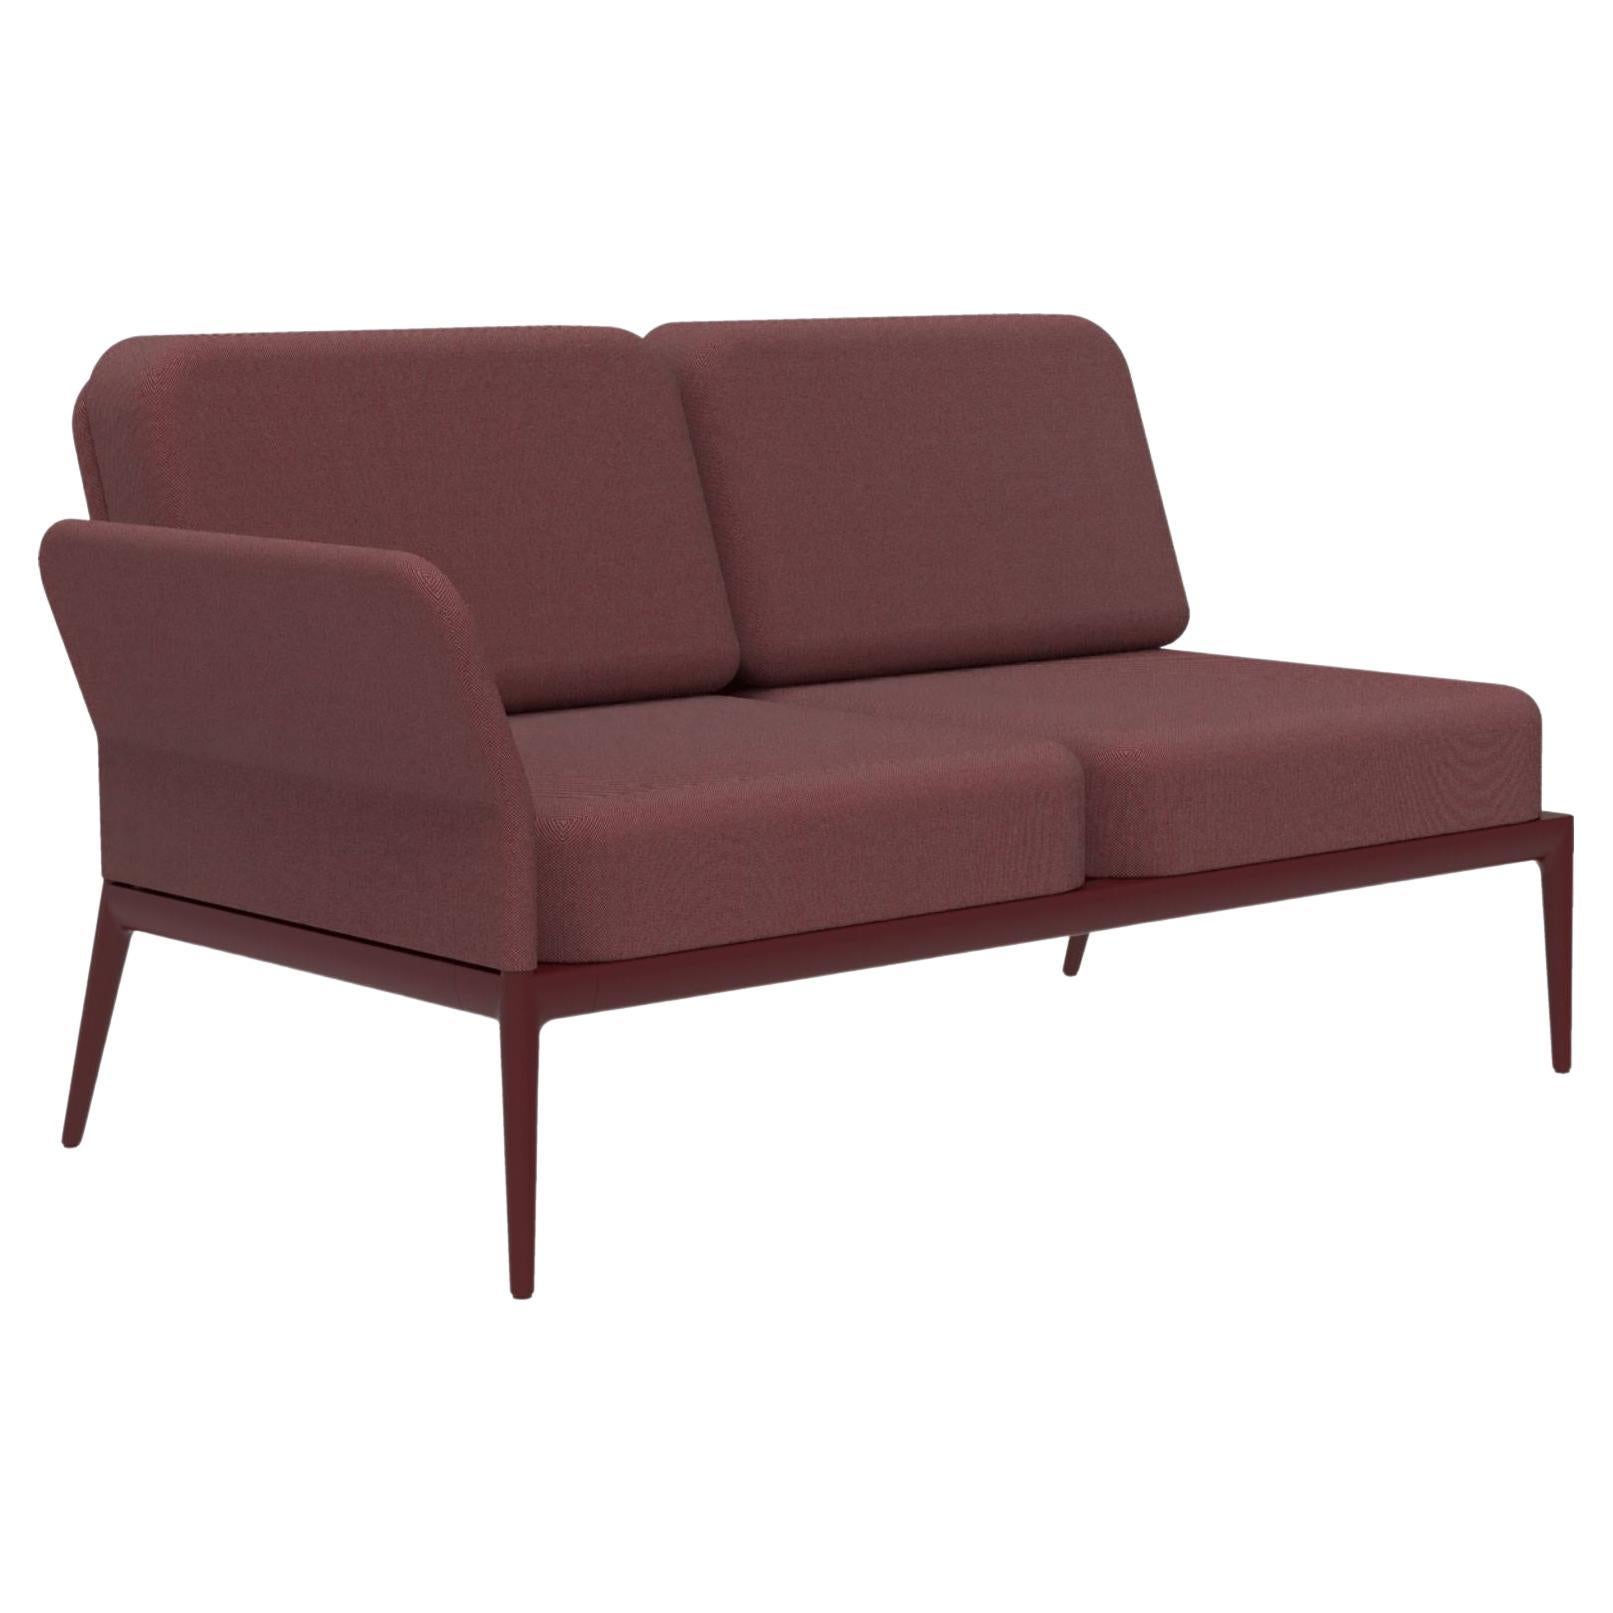 Cover Burgundy Double Modular Right Sofa by MOWEE